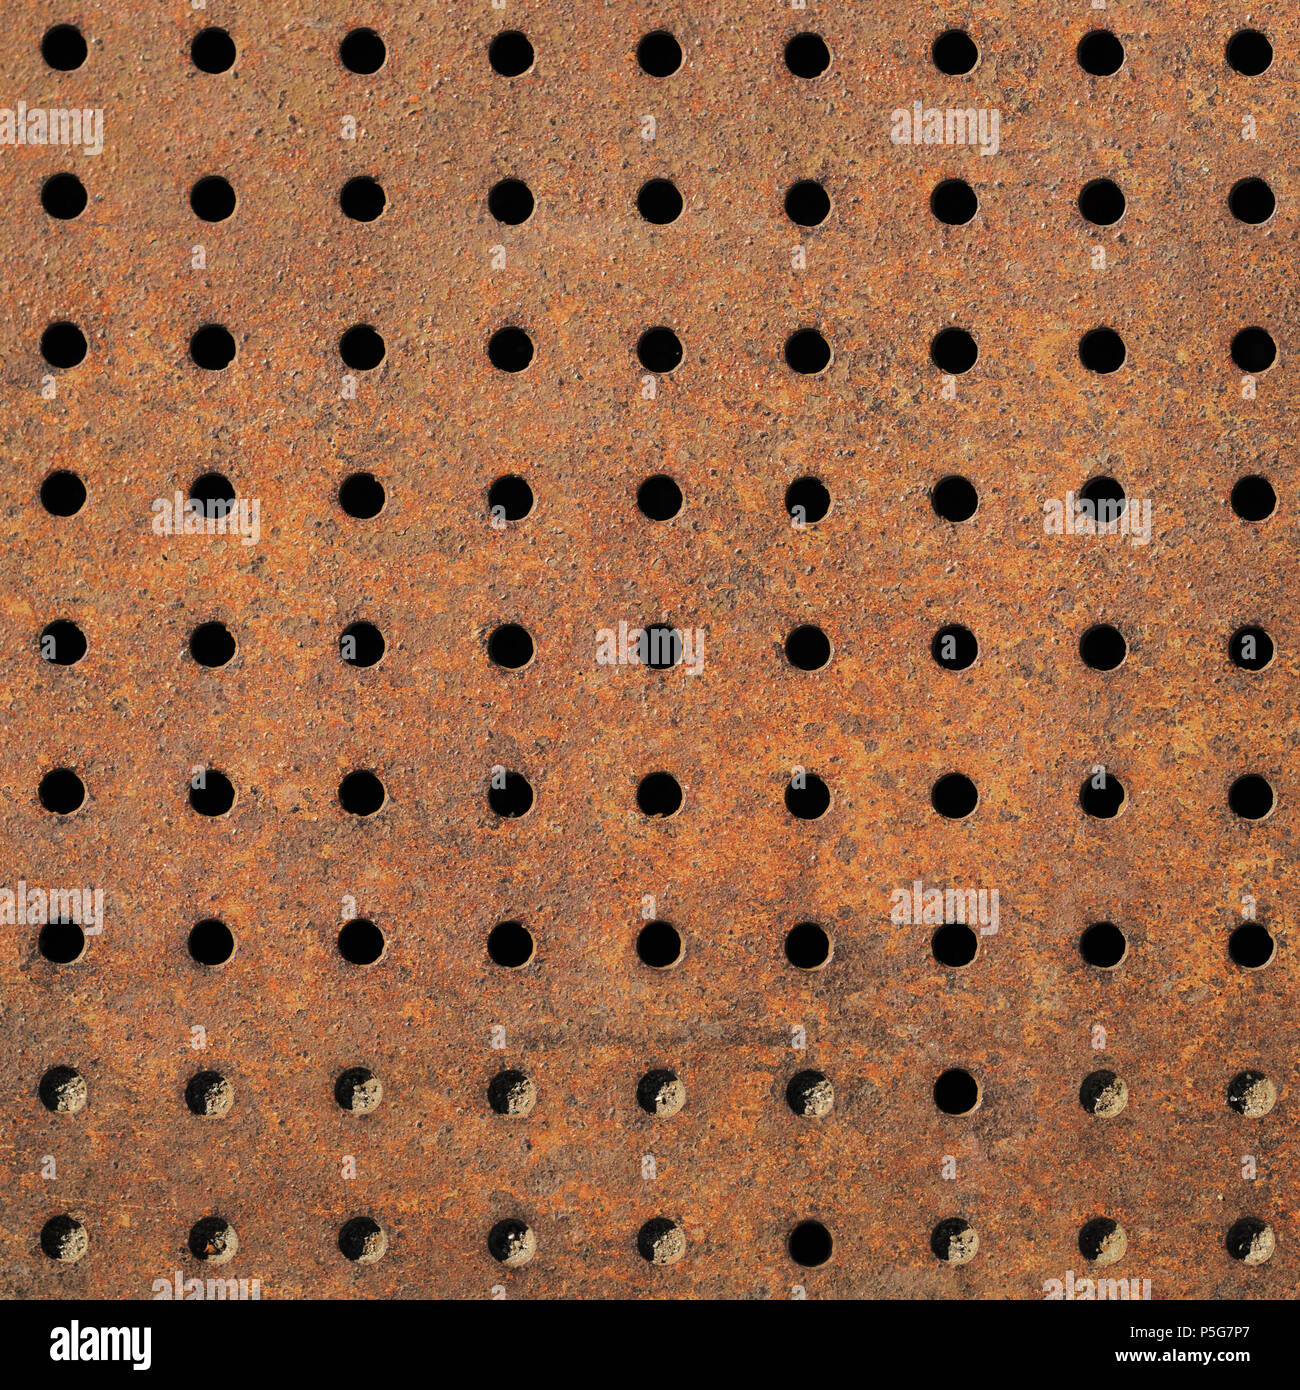 Rusty Texture Of Perforated Metal With Regular Pattern Of Holes Stock Photo Alamy